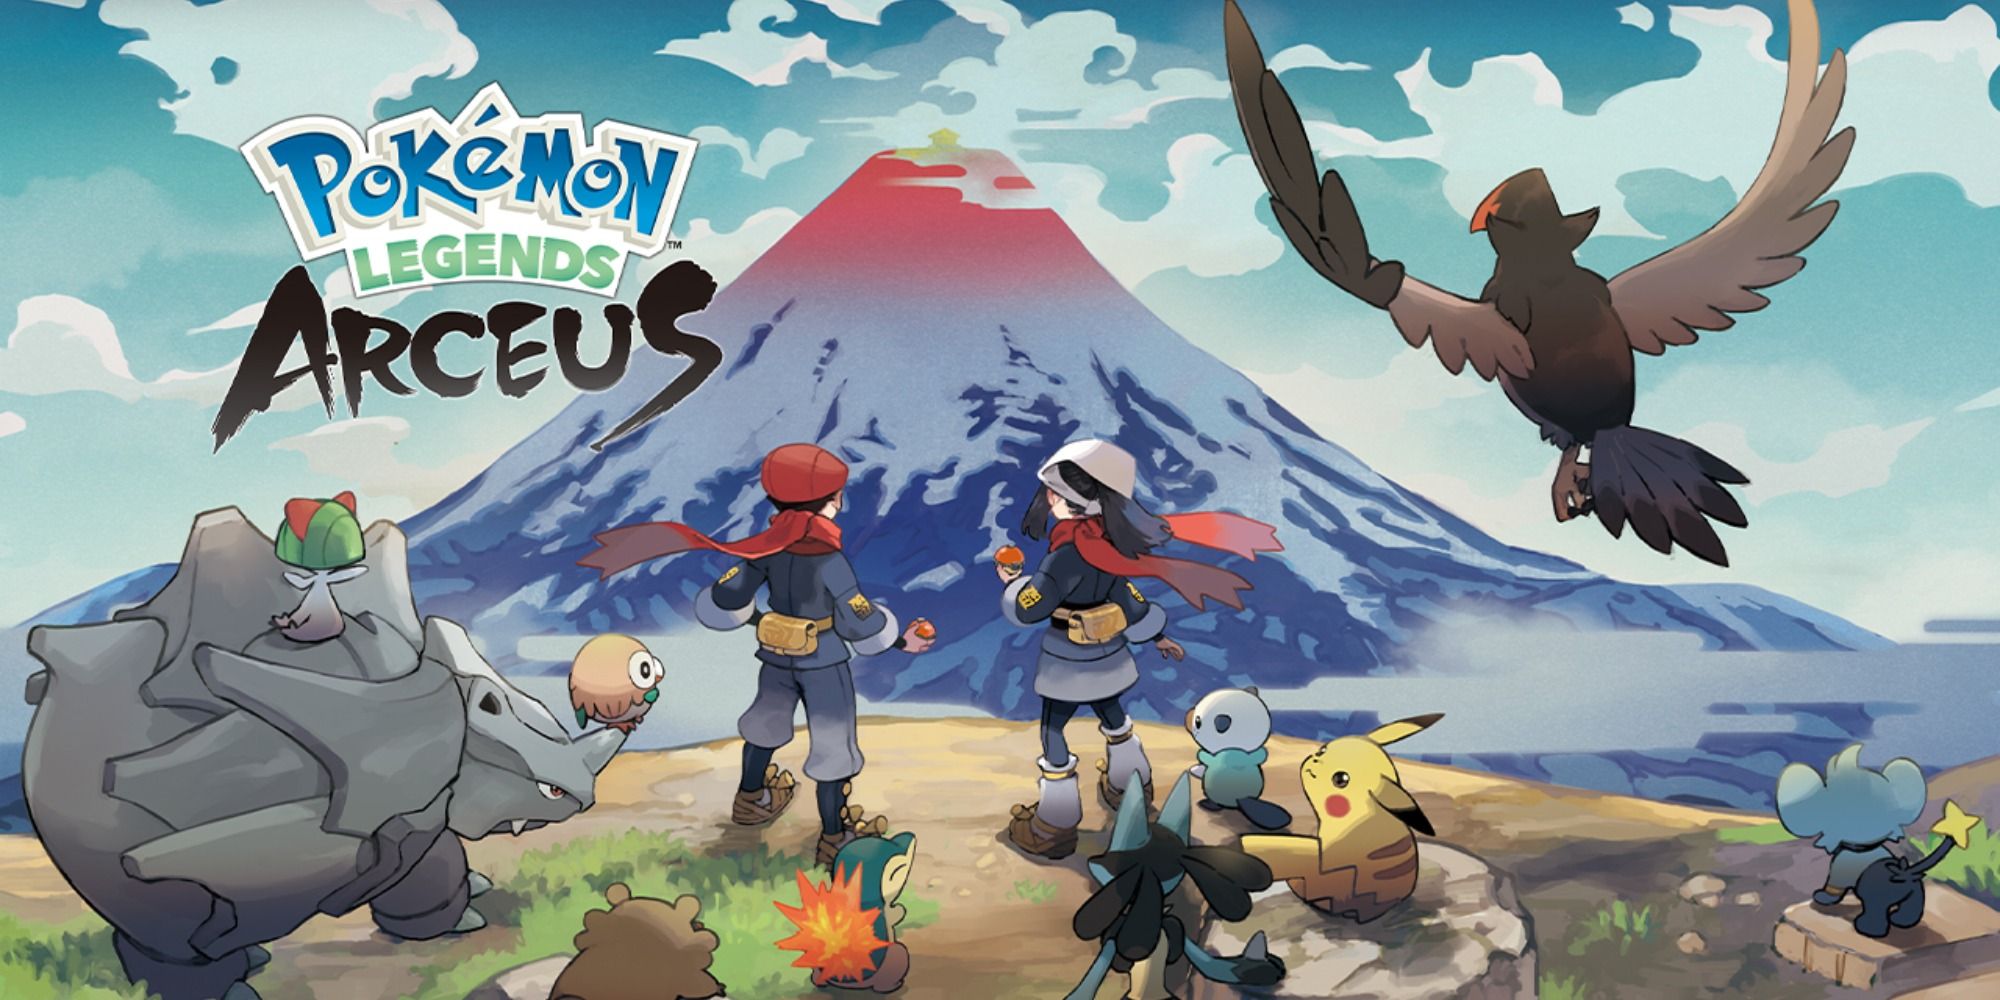 Pokemon Legends Arceus - The Pokemon Trainers Staring Out Over A Cliff With Pikachu, Lucario, And Several Other Pokemon